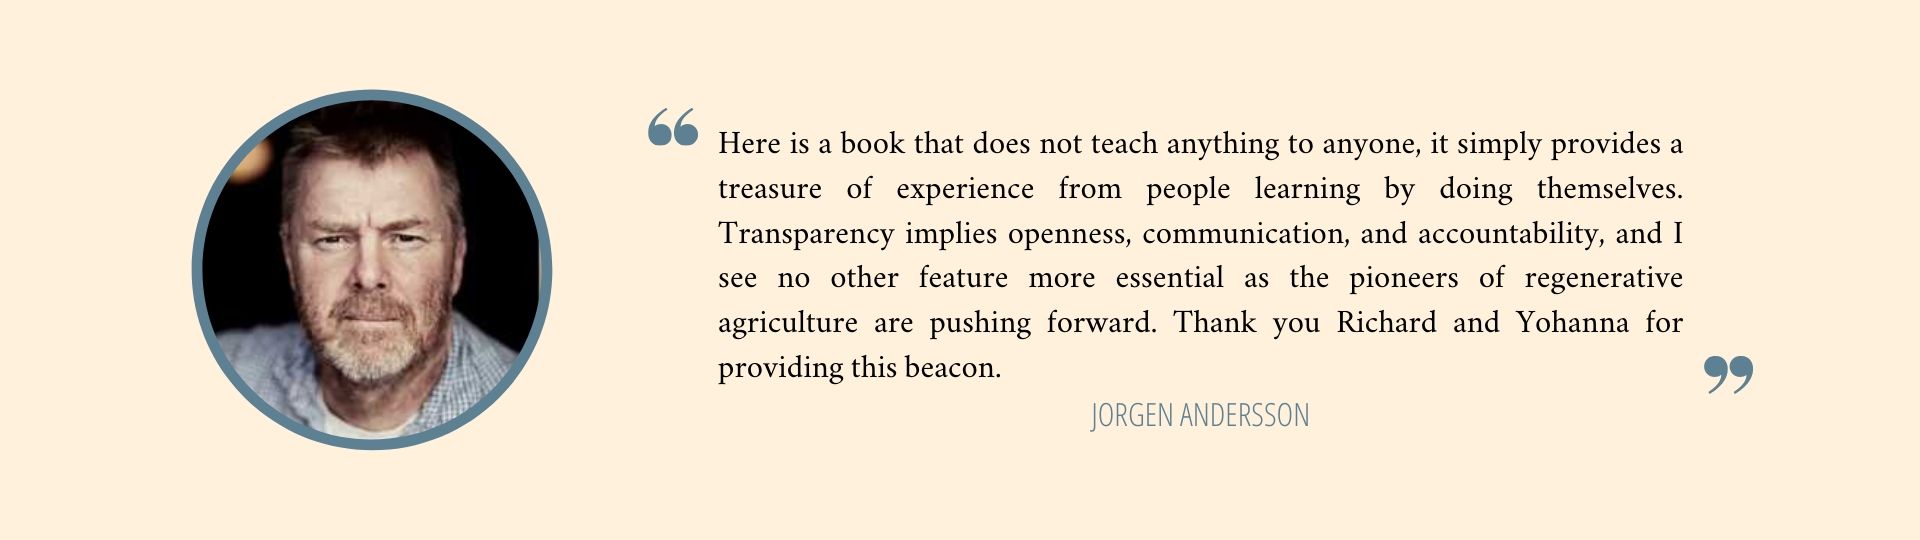 Here is a book that does not teach anything to anyone, it simply provides a treasure of experience from people learning by doing themselves. Transparency implies openness, communication, and accountability, and I see no other feature more essential as the pioneers of regenerative agriculture are pushing forward. Thank you Richard and Yohanna for providing this beacon. - Jörgen Andersson